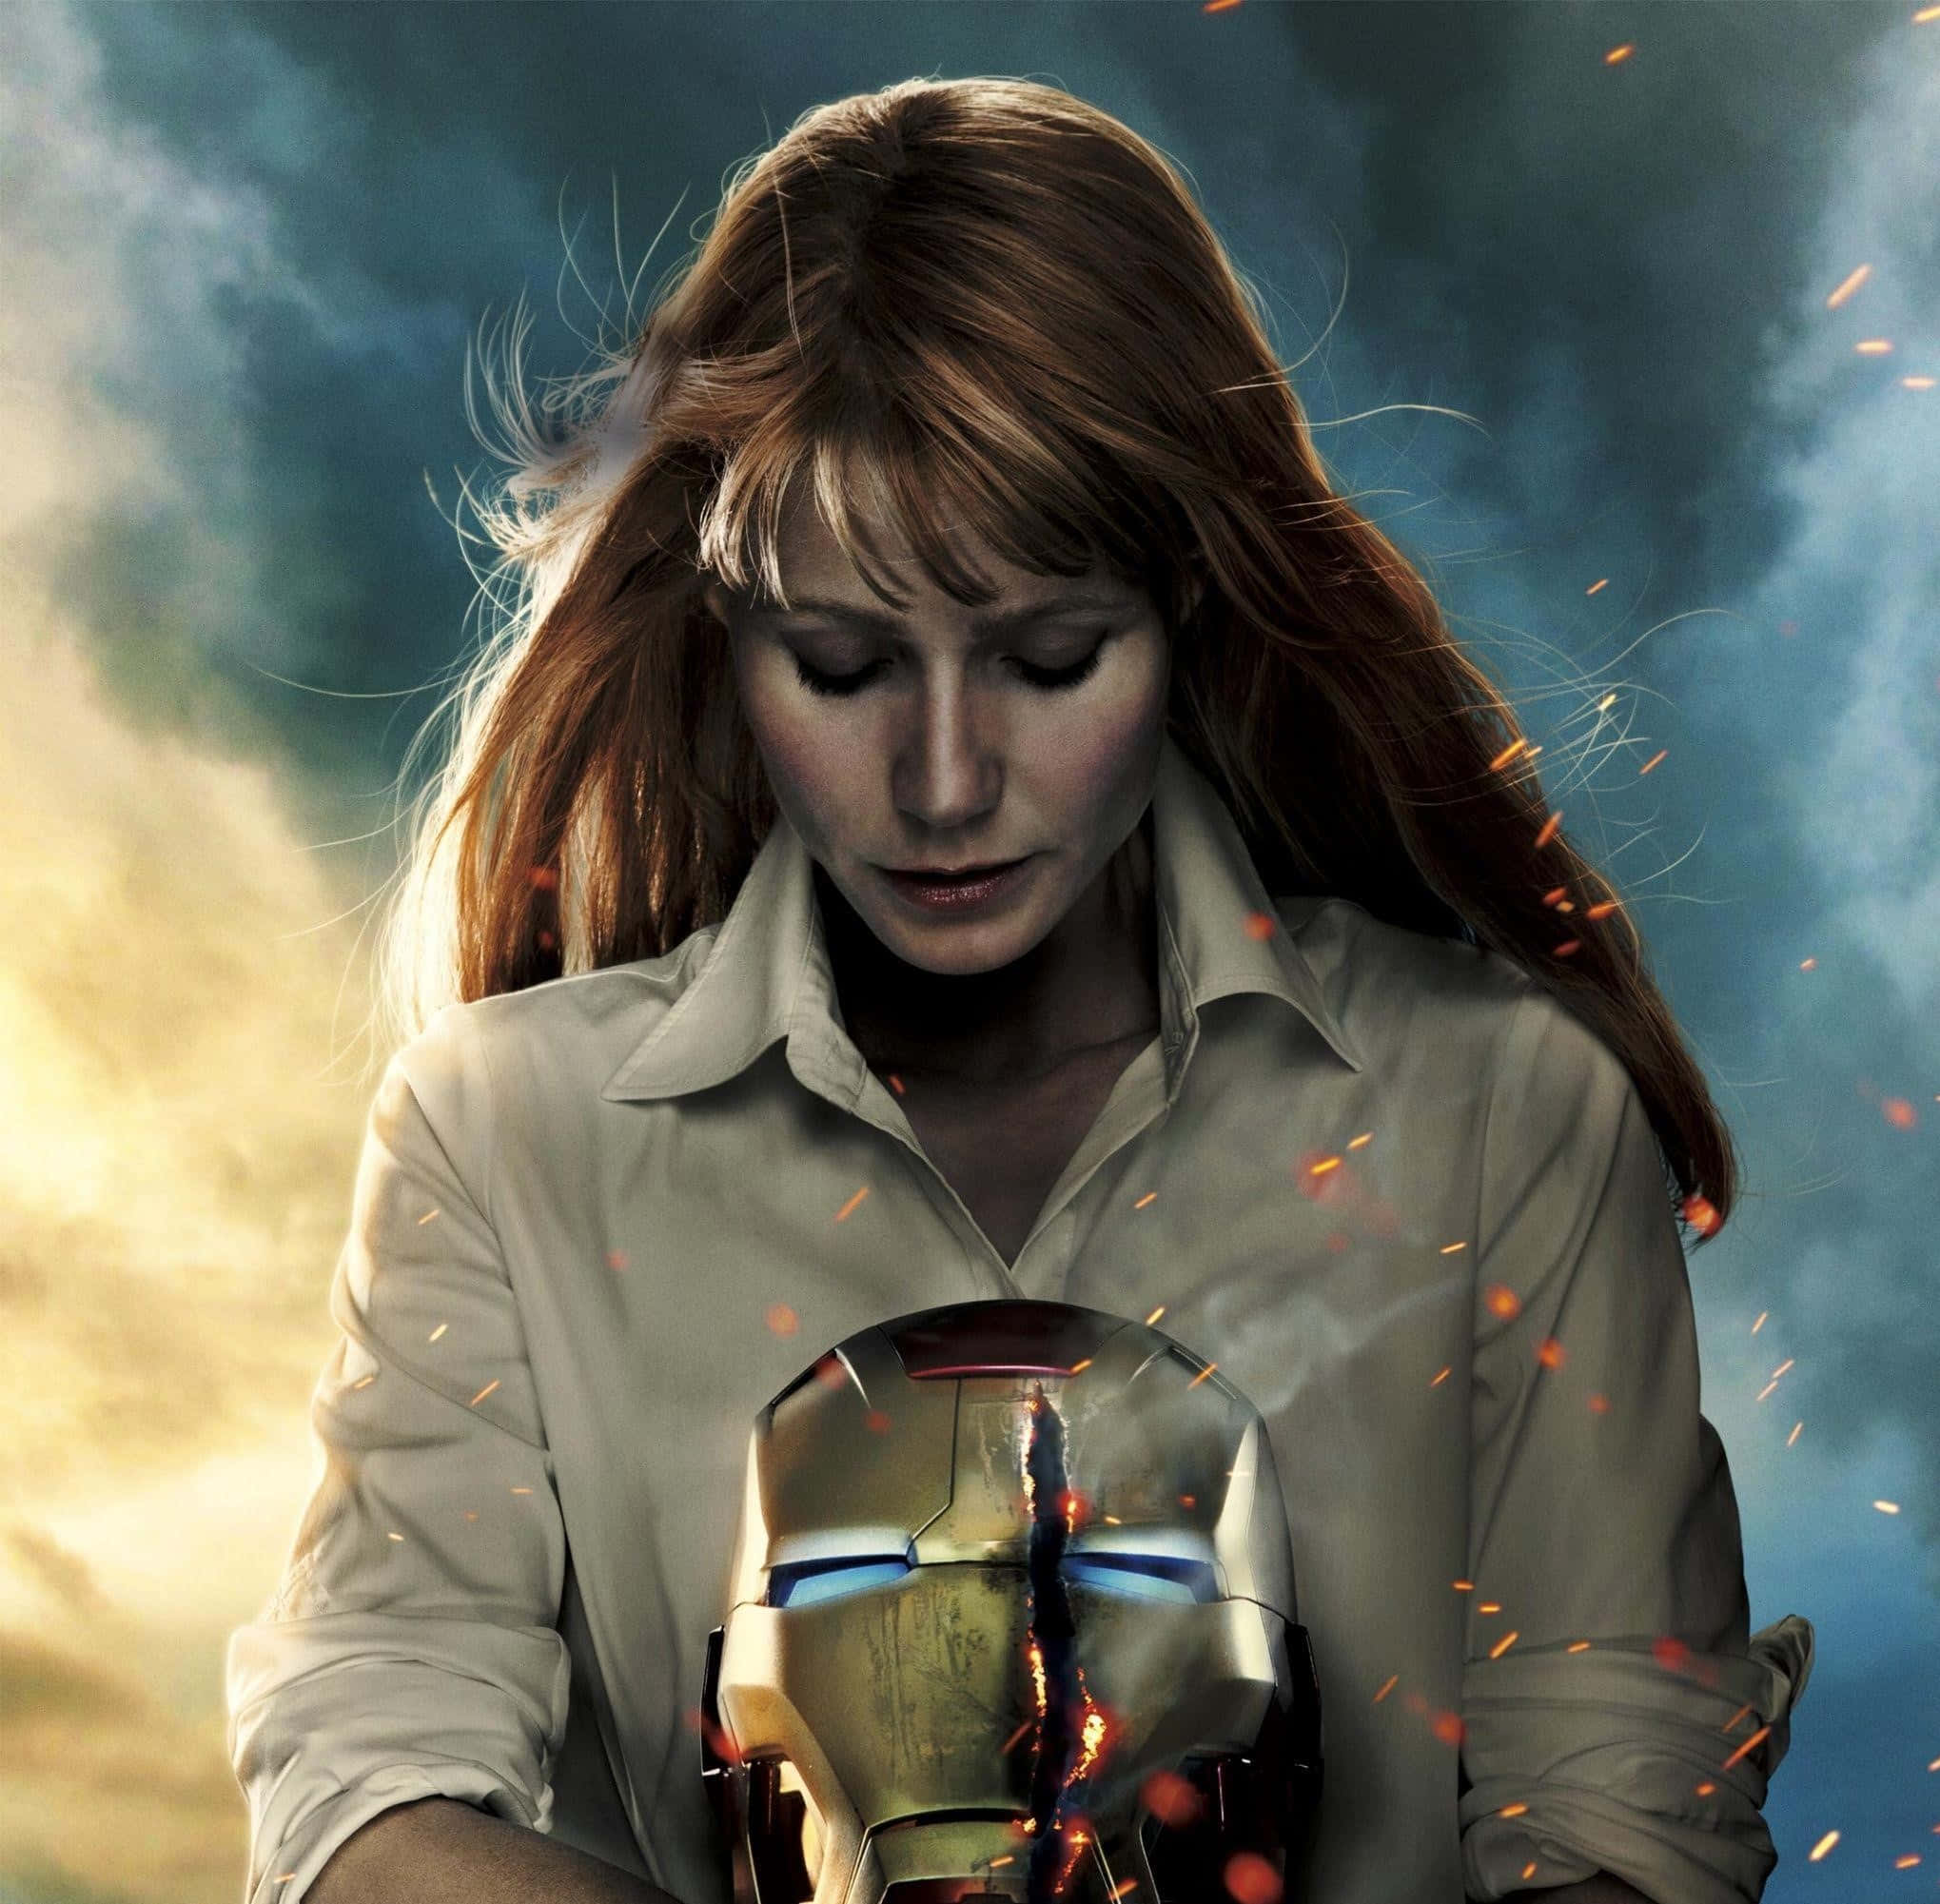 Pepper Potts in her Rescue armor suit ready for action Wallpaper